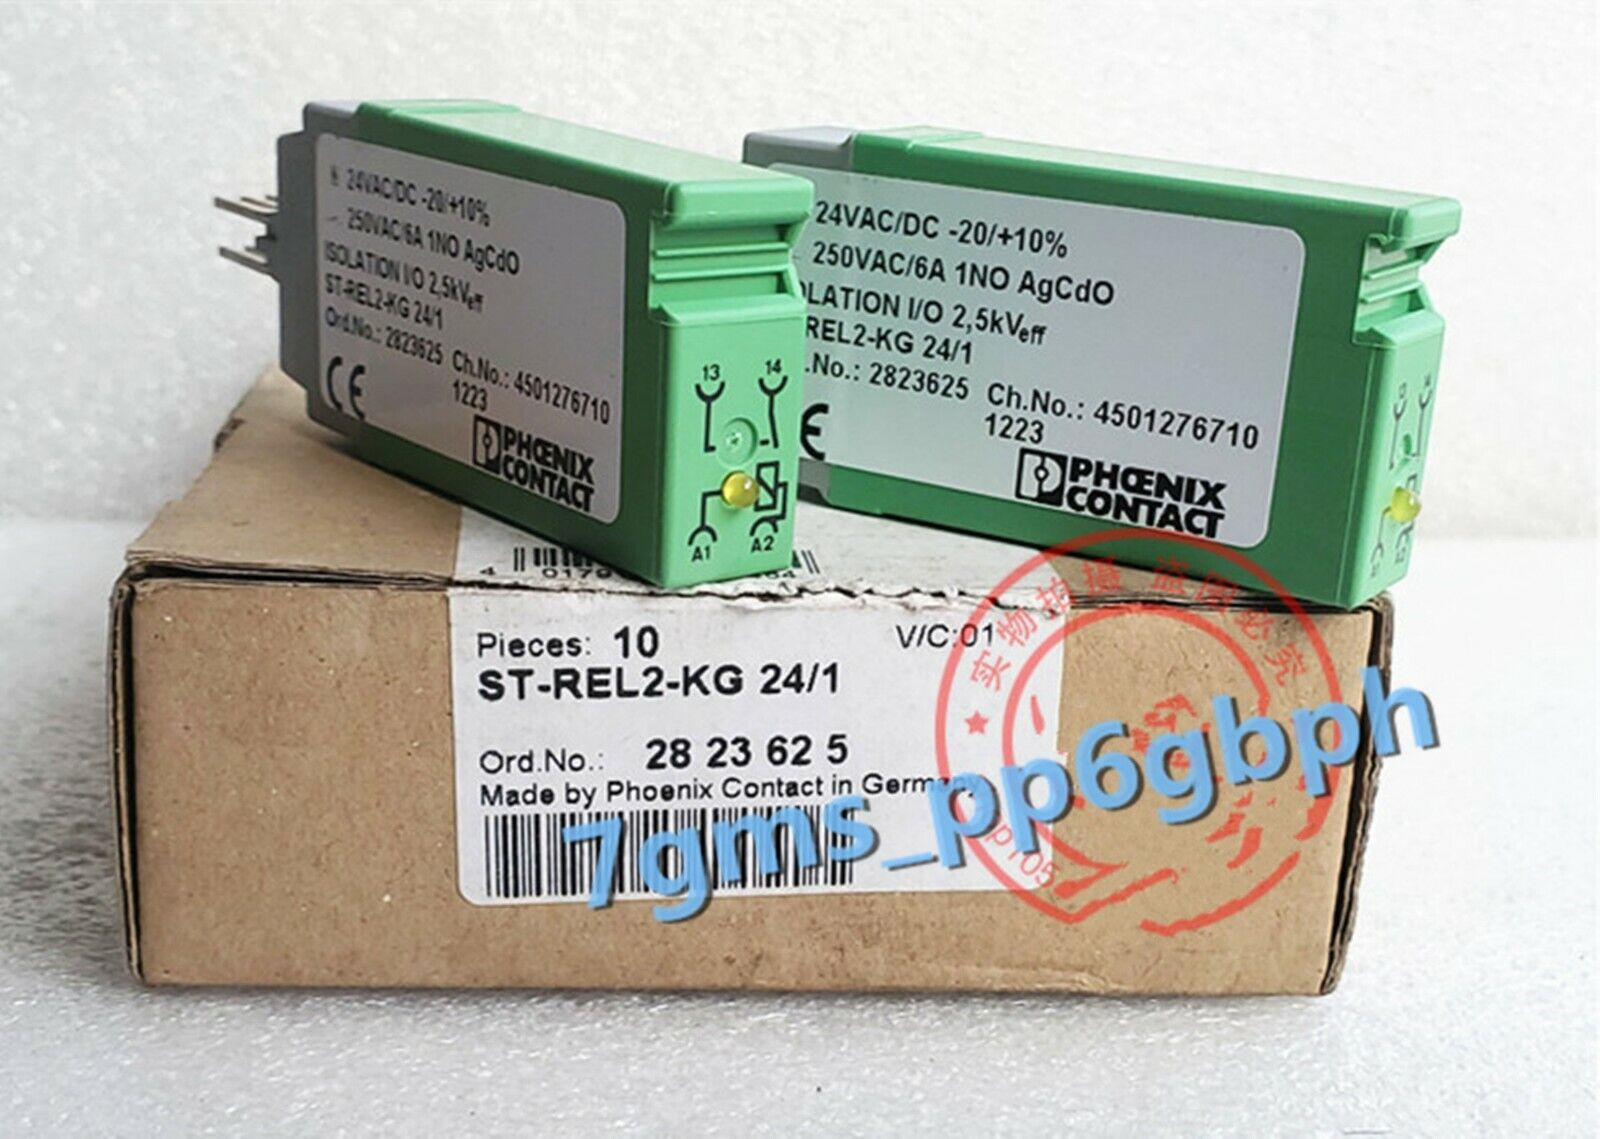 1 PCS NEW IN BOX Phoenix Relay Connector ST-REL2-KG 24/1 2823625